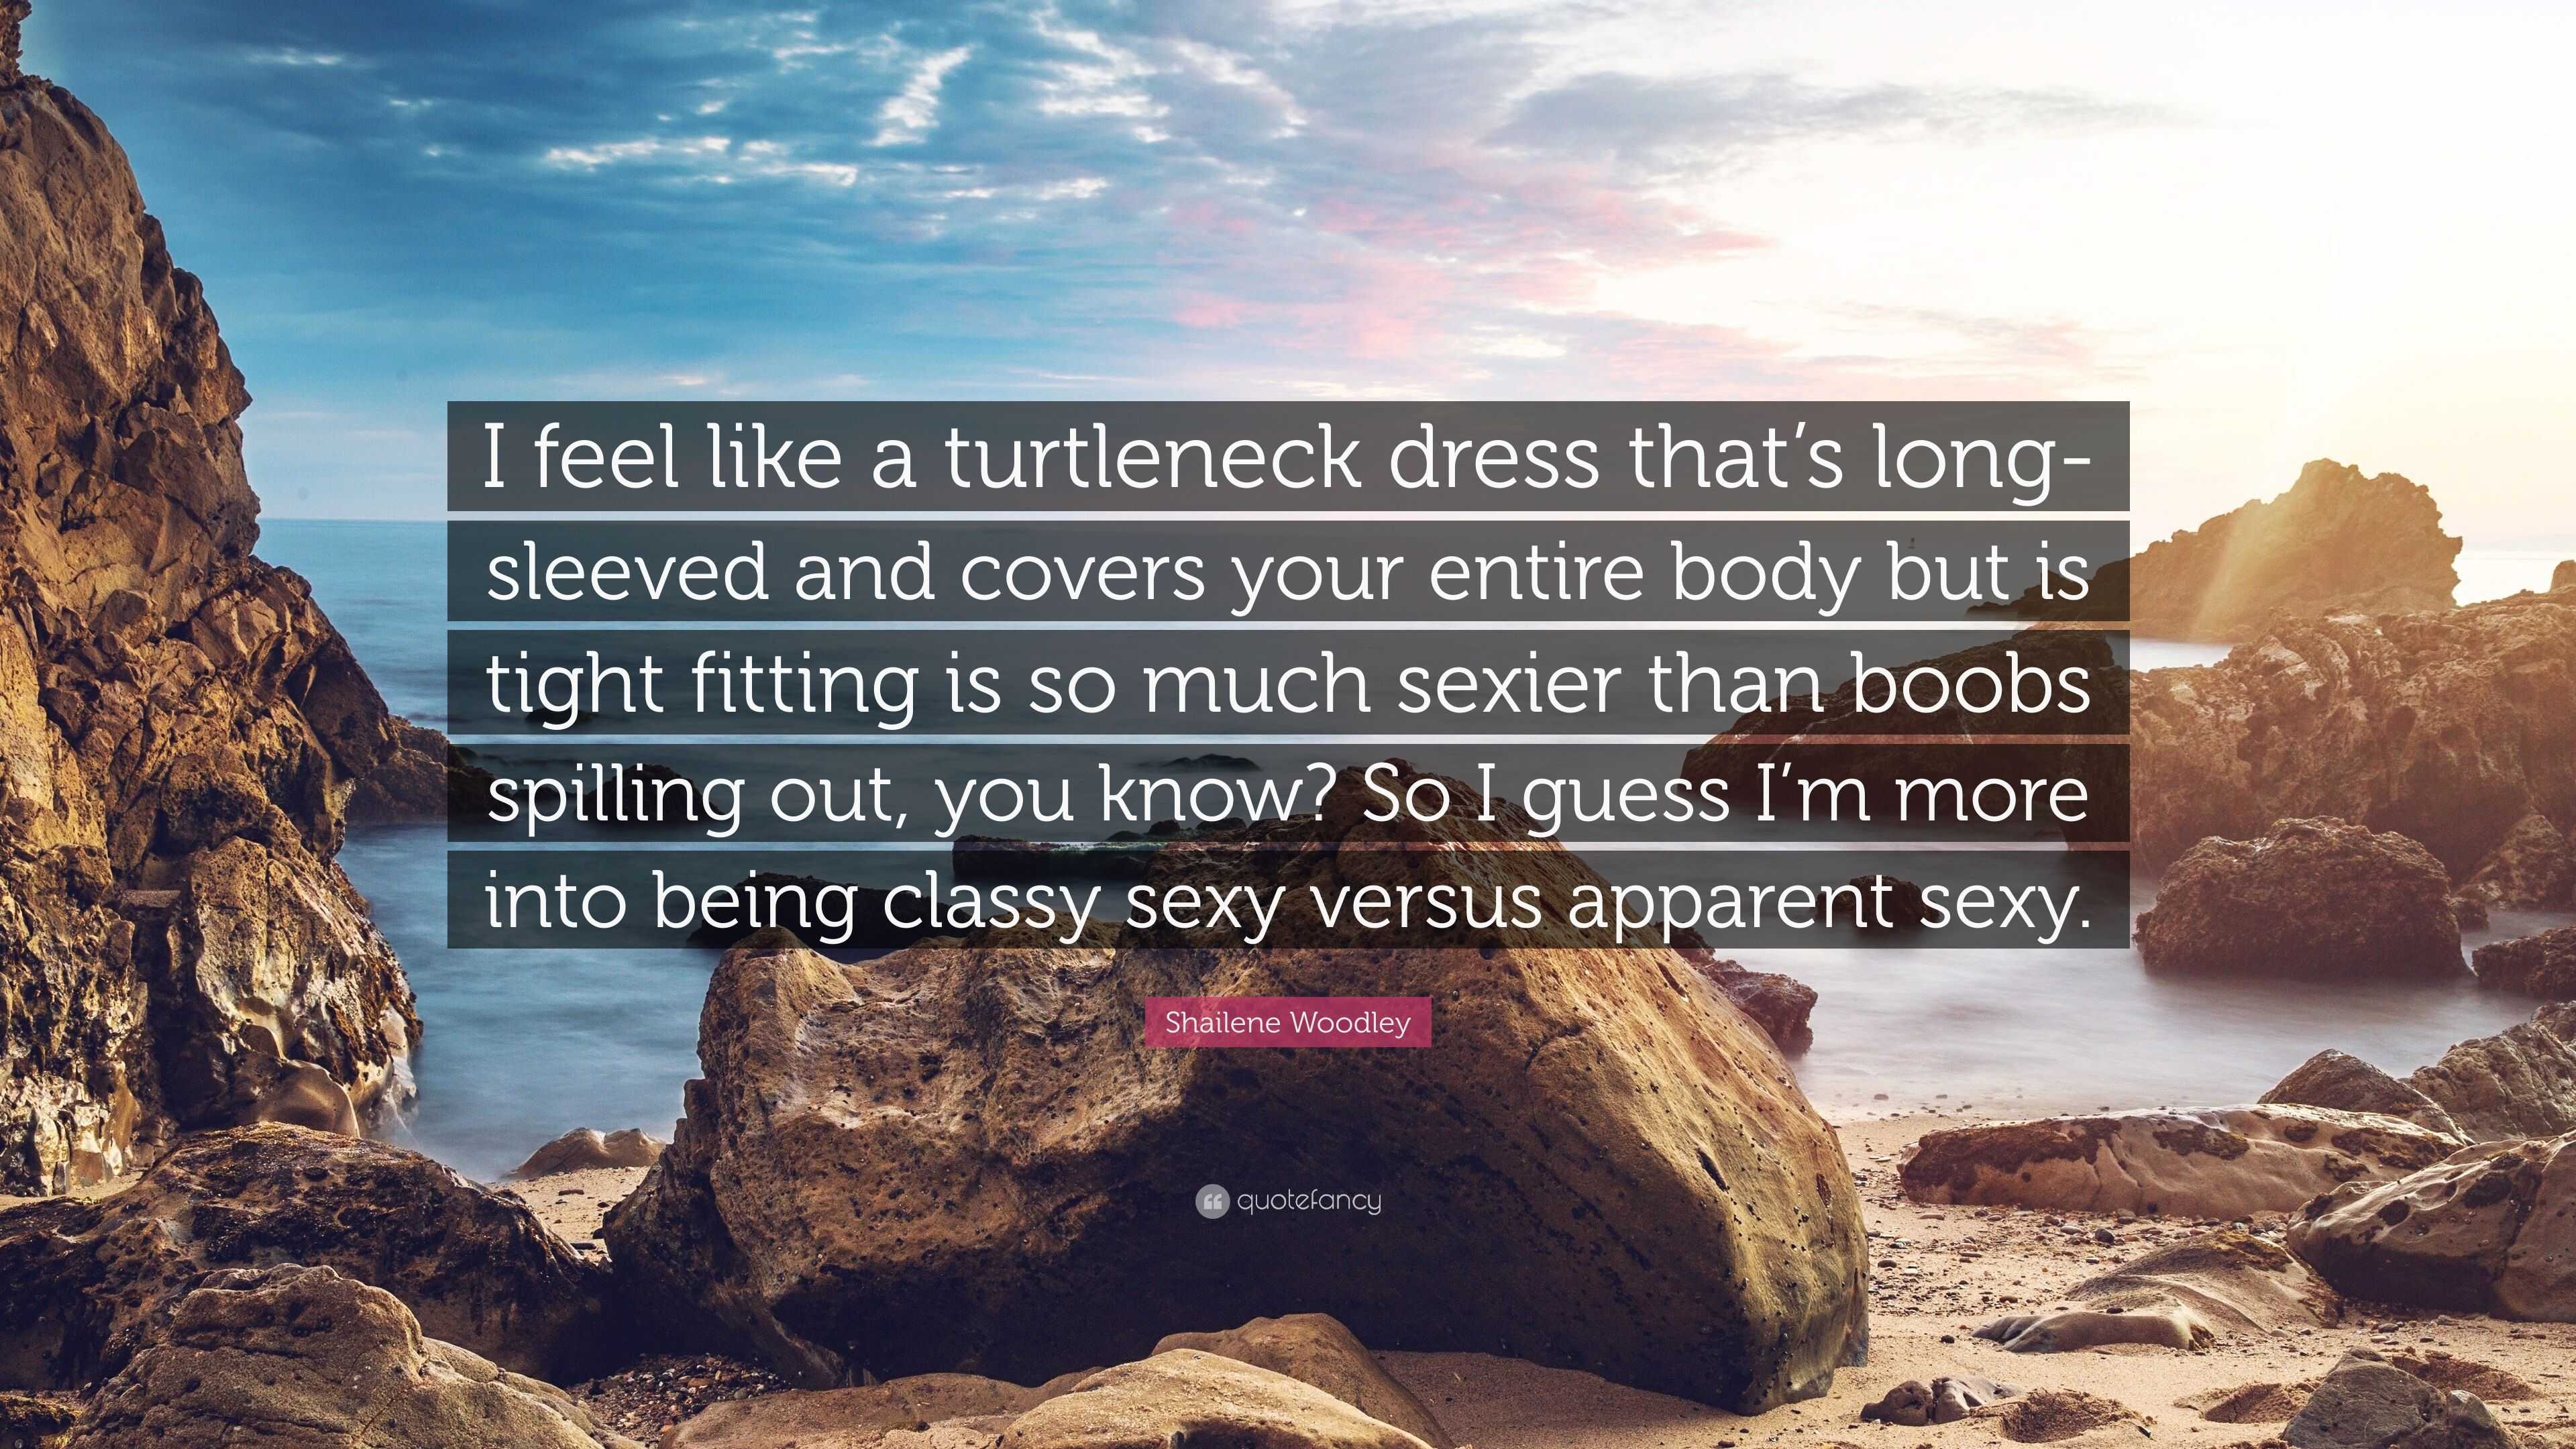 Because all bodies deserve to get dressed in ease. #slickchicks